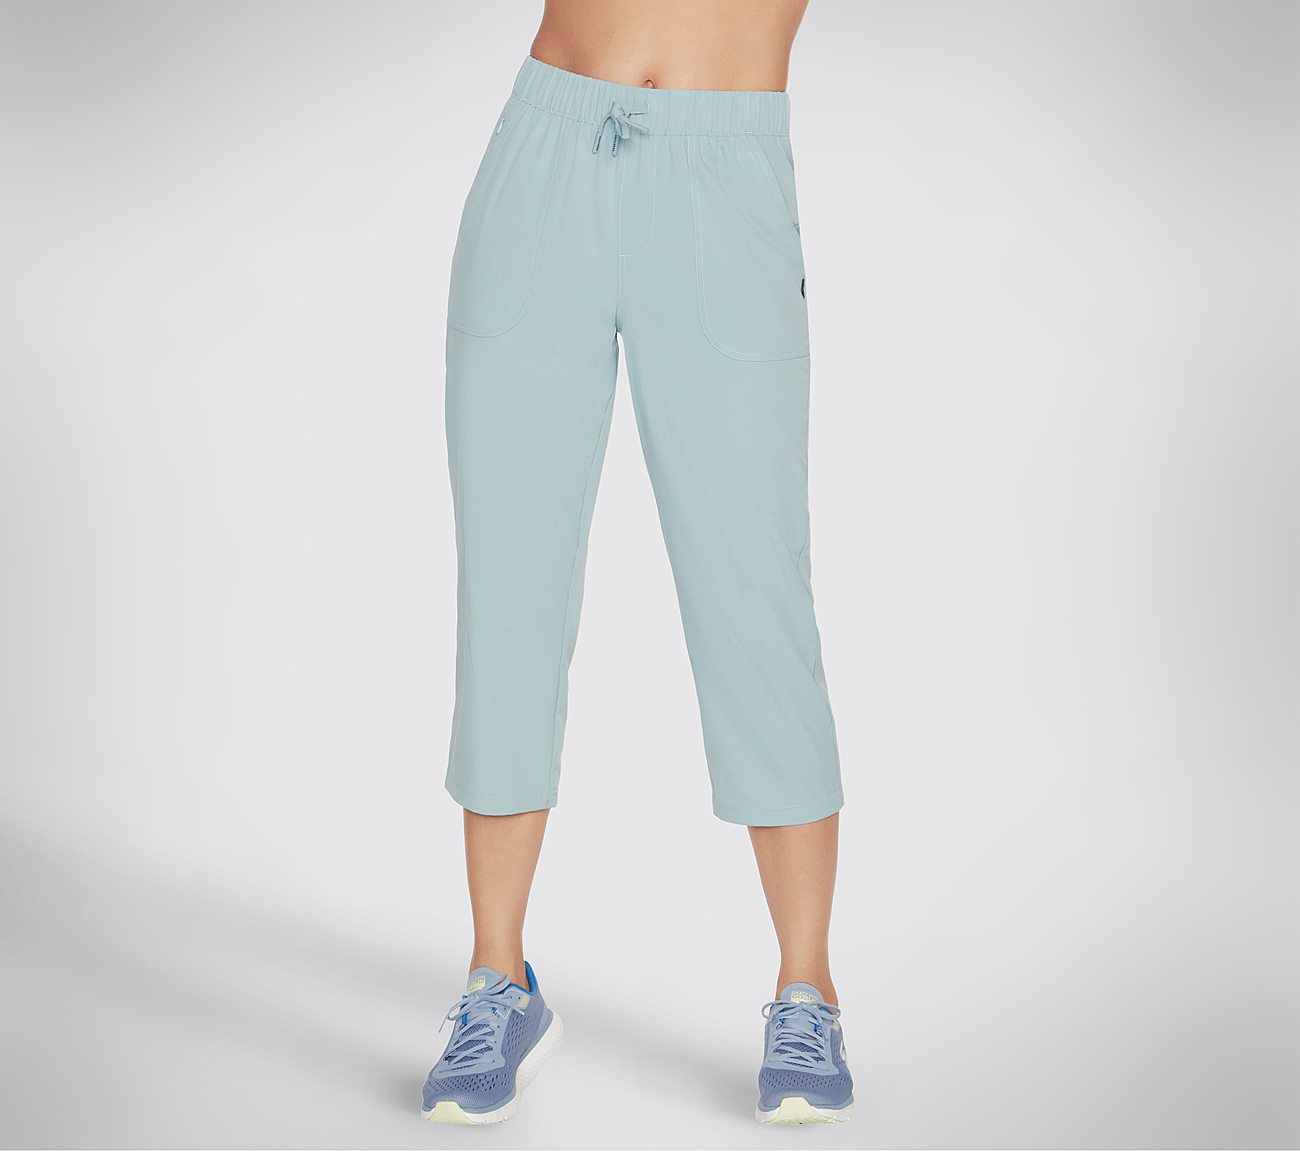 INCLINE MIDCALF PANT, LIGHT GREY/BLUE Apparel Lateral View